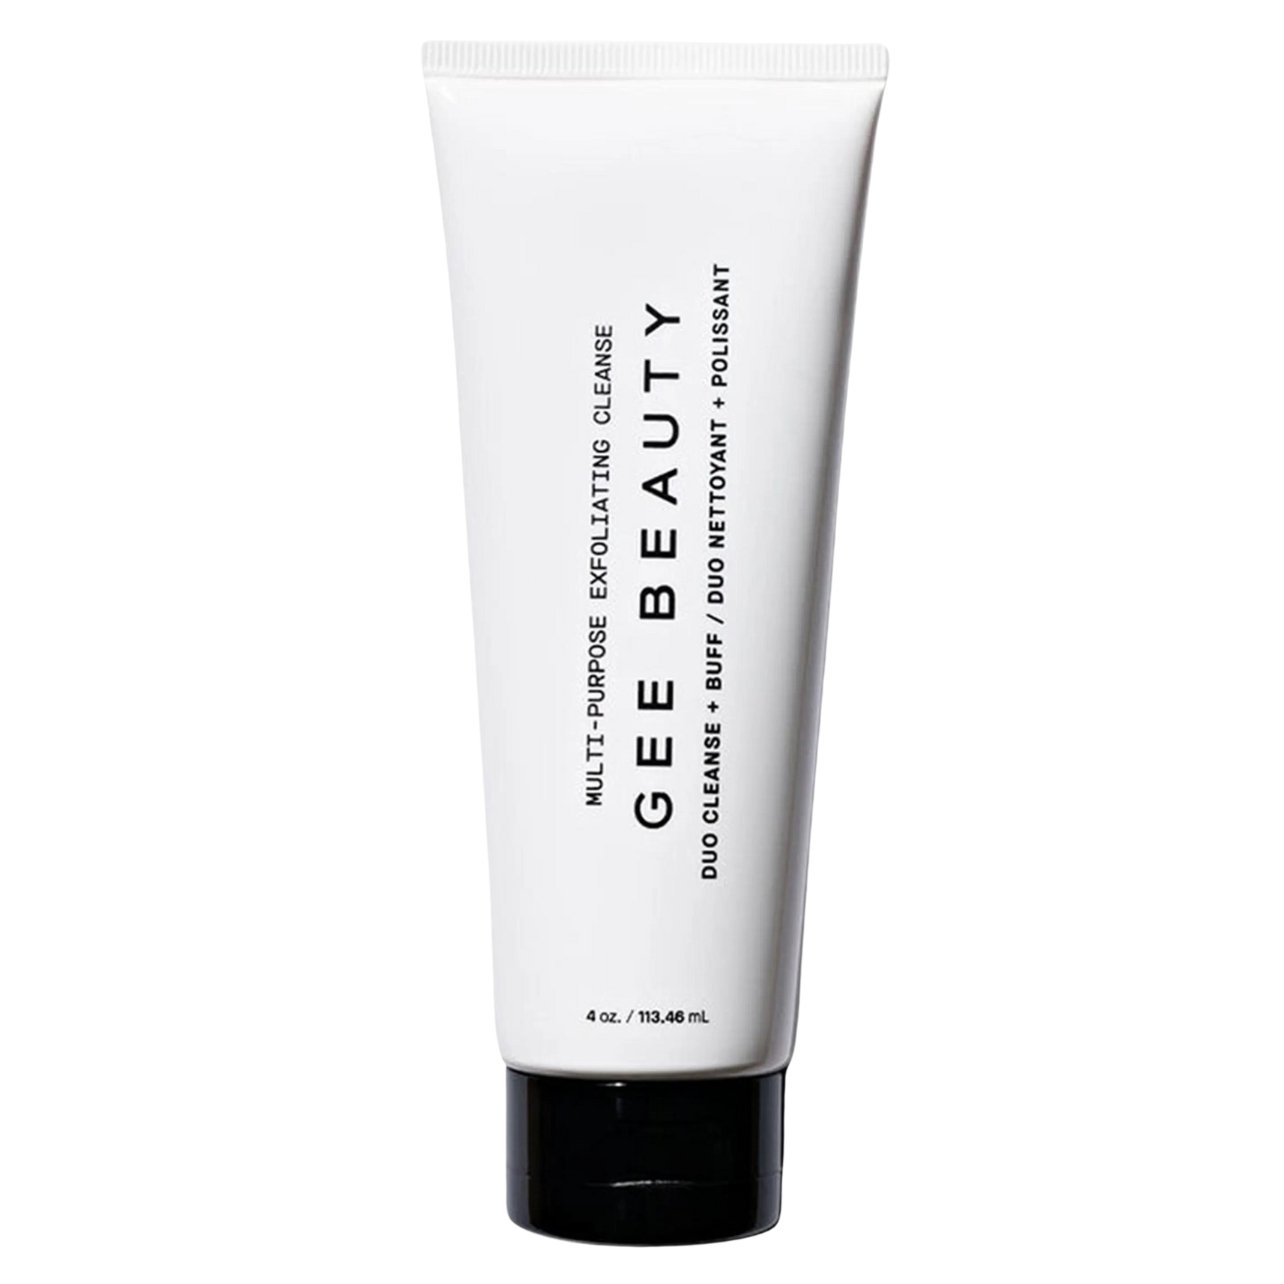 Gee Beauty duo cleanse and buff exfoliating cleanser